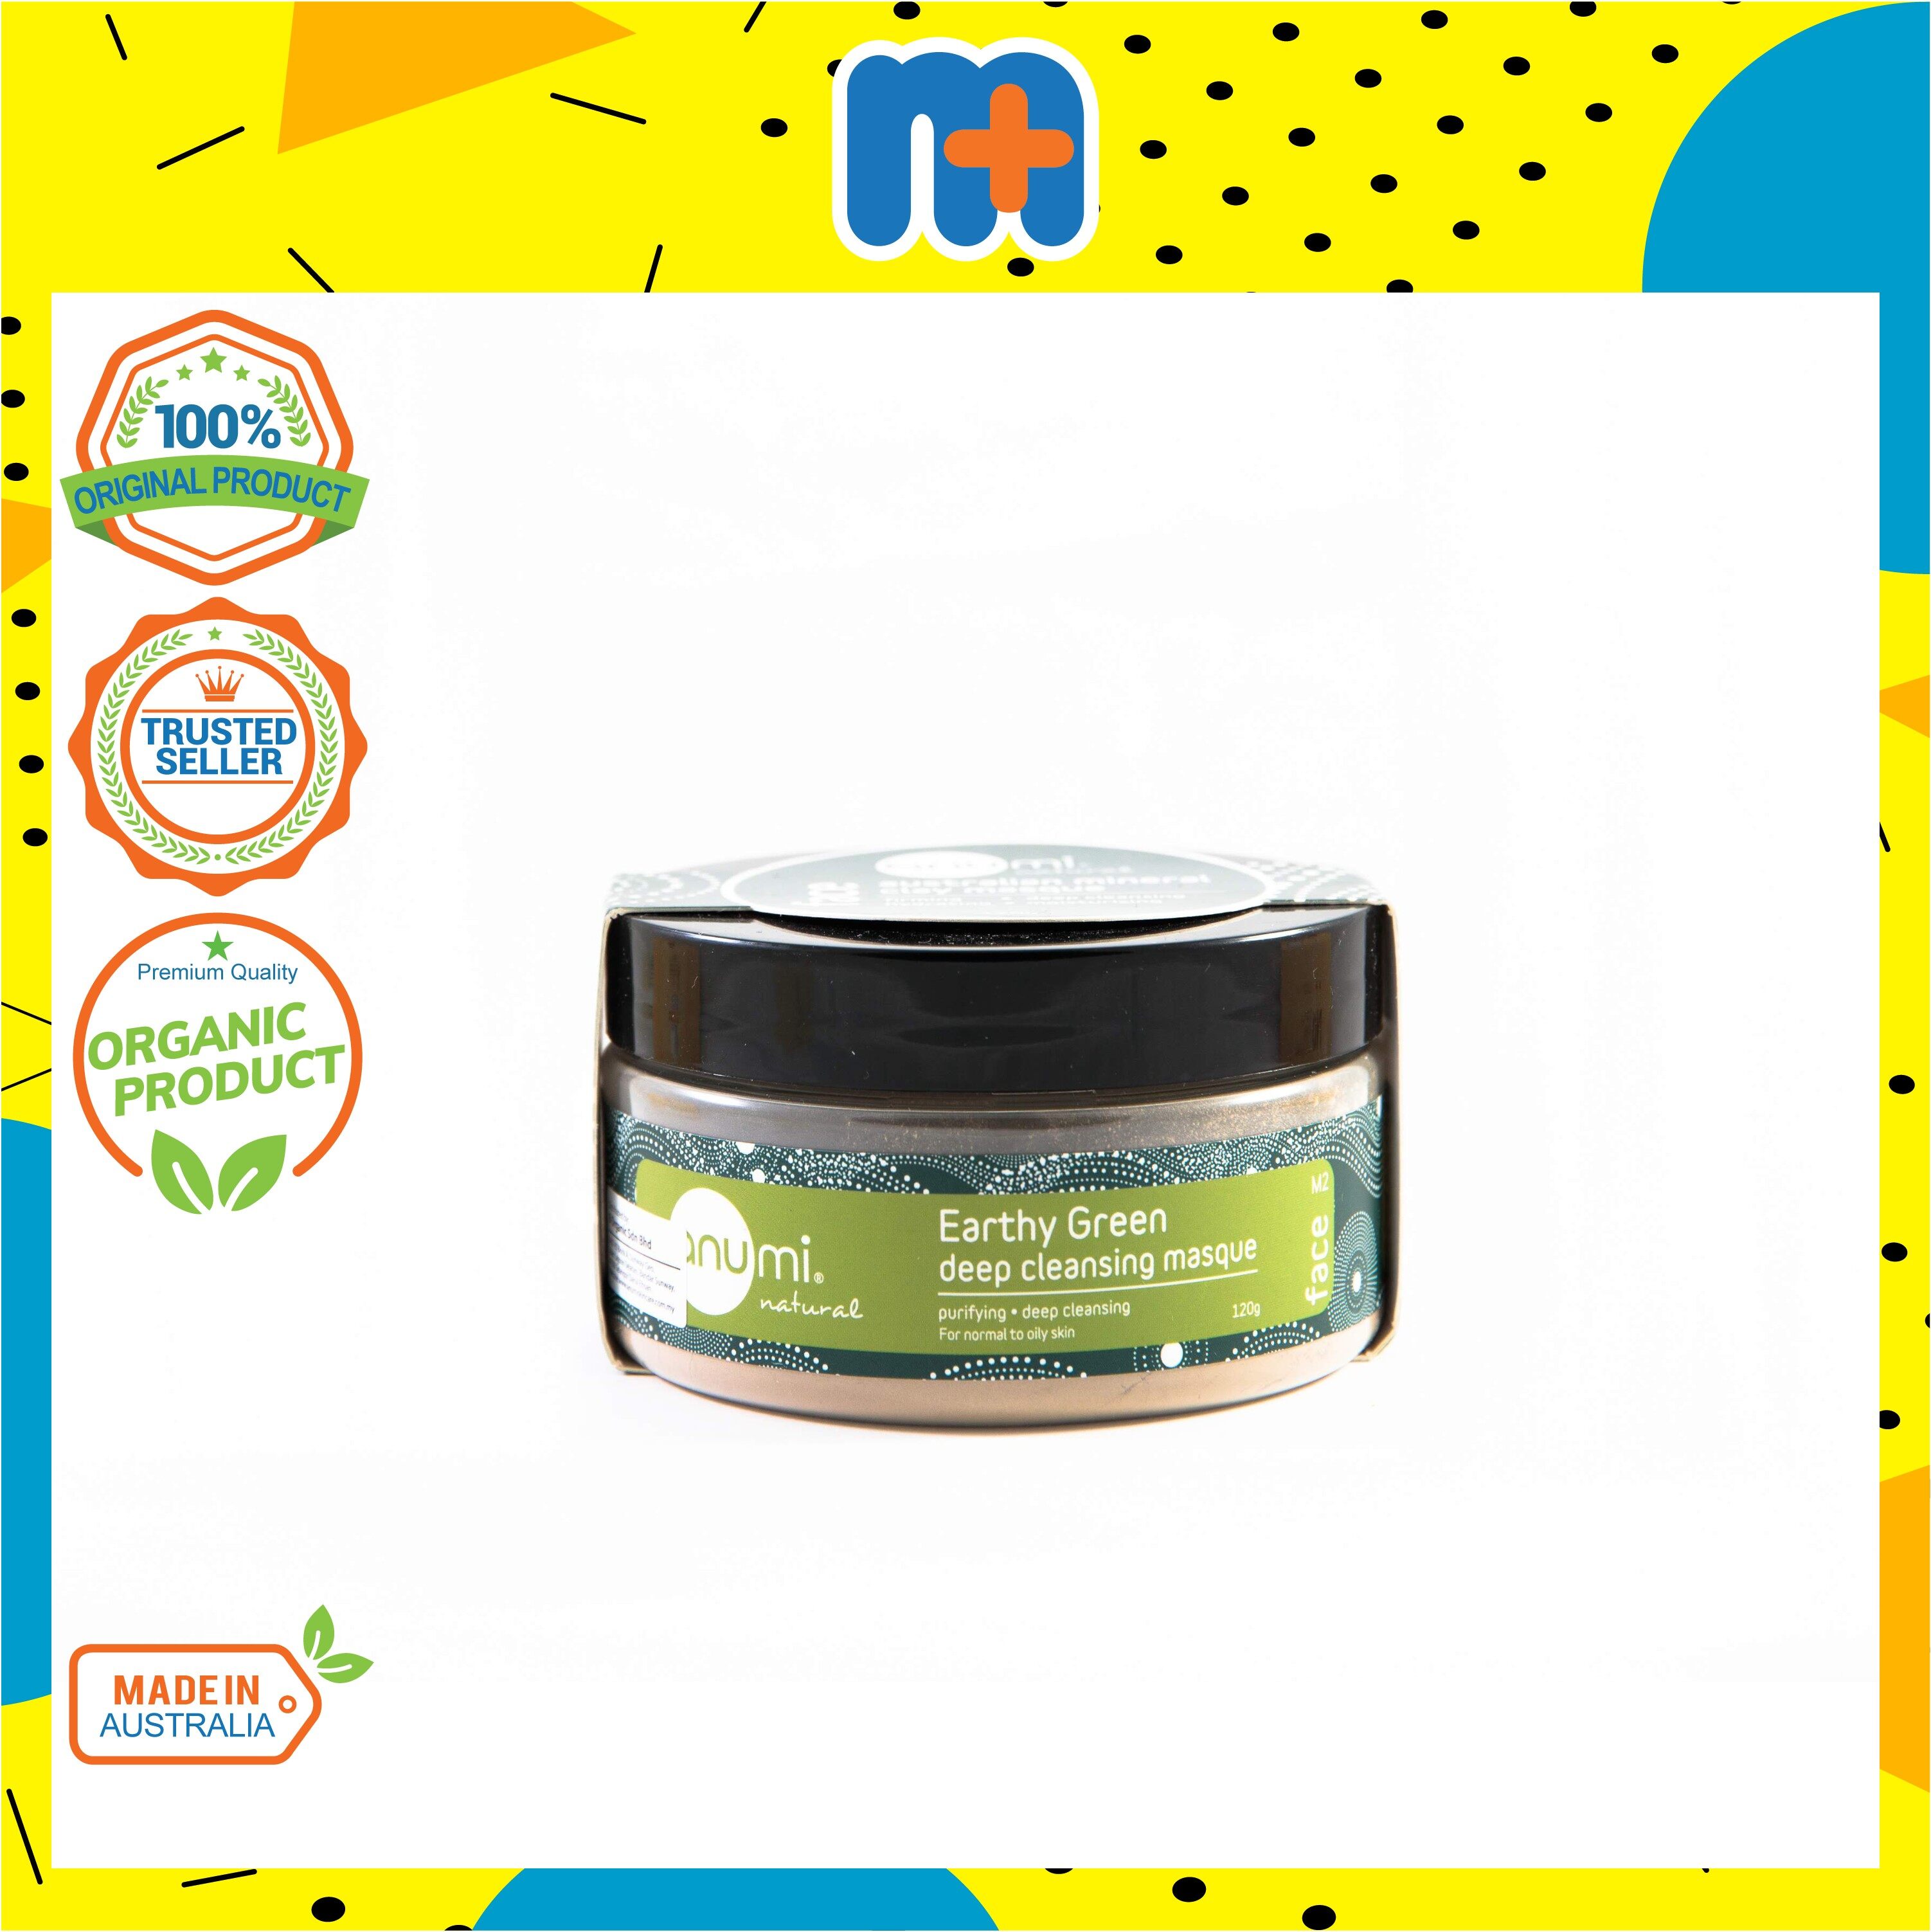 [MPLUS] Anumi Earthy Green Deep Cleansing Clay Masque 120g